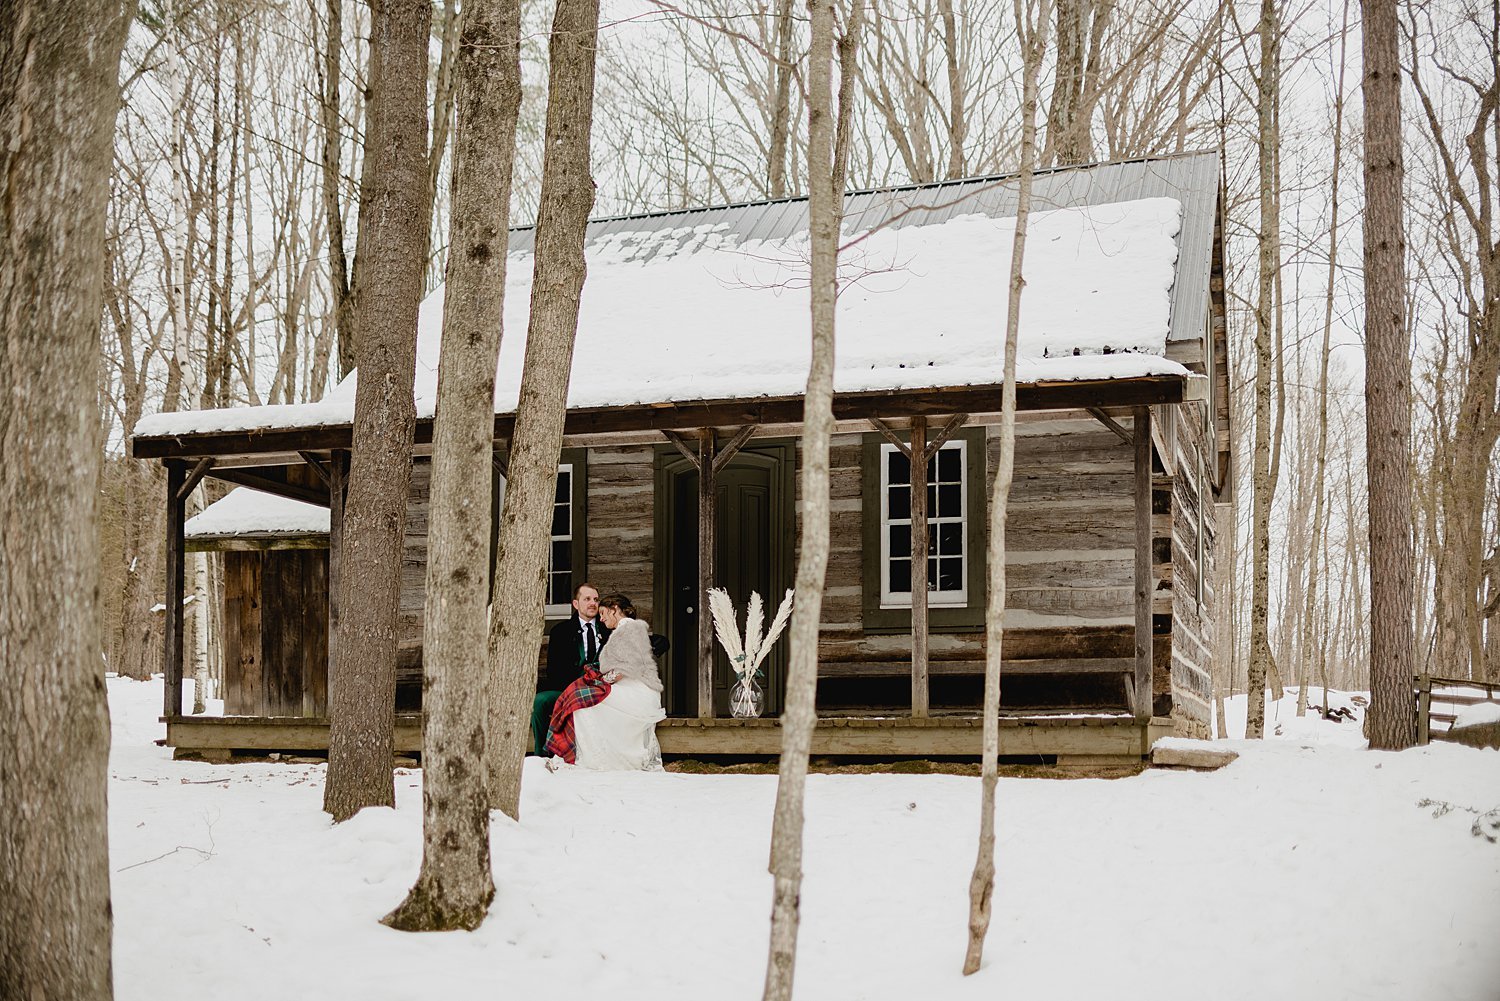 Intimate Winter Elopement at O'Hara Mill Homestead in Madoc, Ontario | Prince Edward County Wedding Photographer | Holly McMurter Photographs_0049.jpg